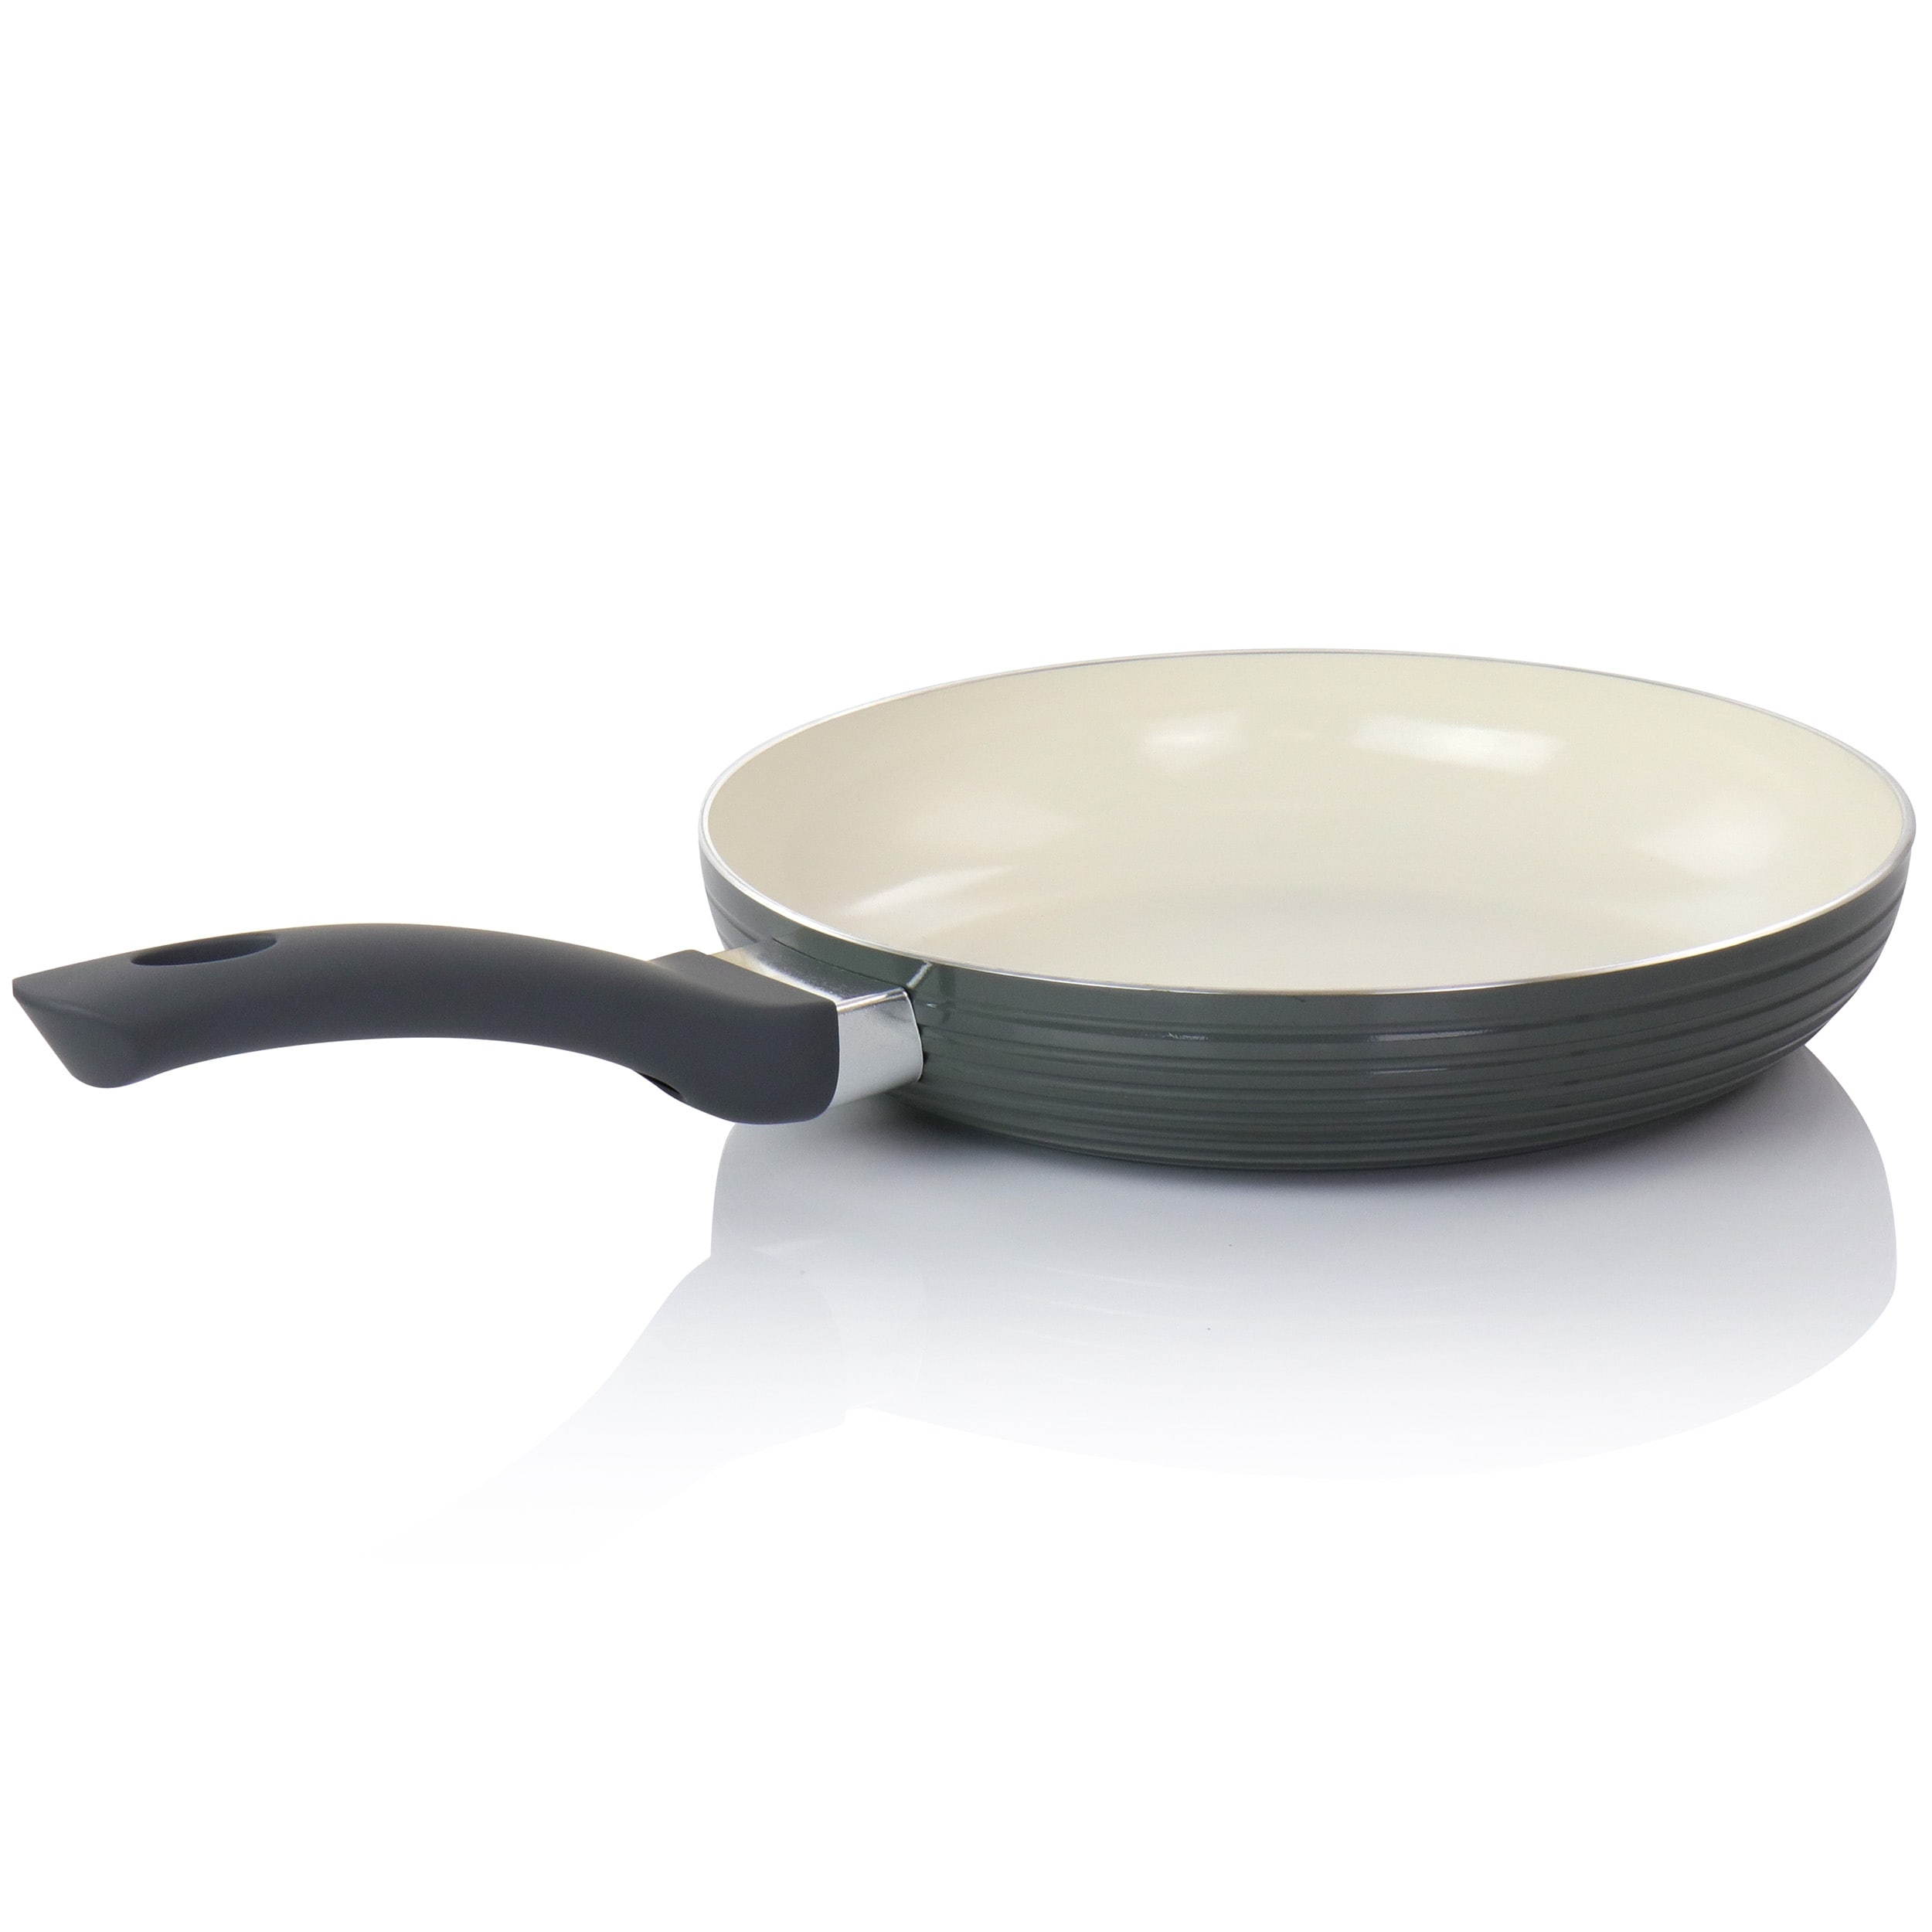 https://ak1.ostkcdn.com/images/products/is/images/direct/fd1ce4345debabdfb43c3d7b765899aa8cc2204f/Oster-Ridge-Valley-10-Inch-Aluminum-Nonstick-Frying-Pan-in-Grey.jpg